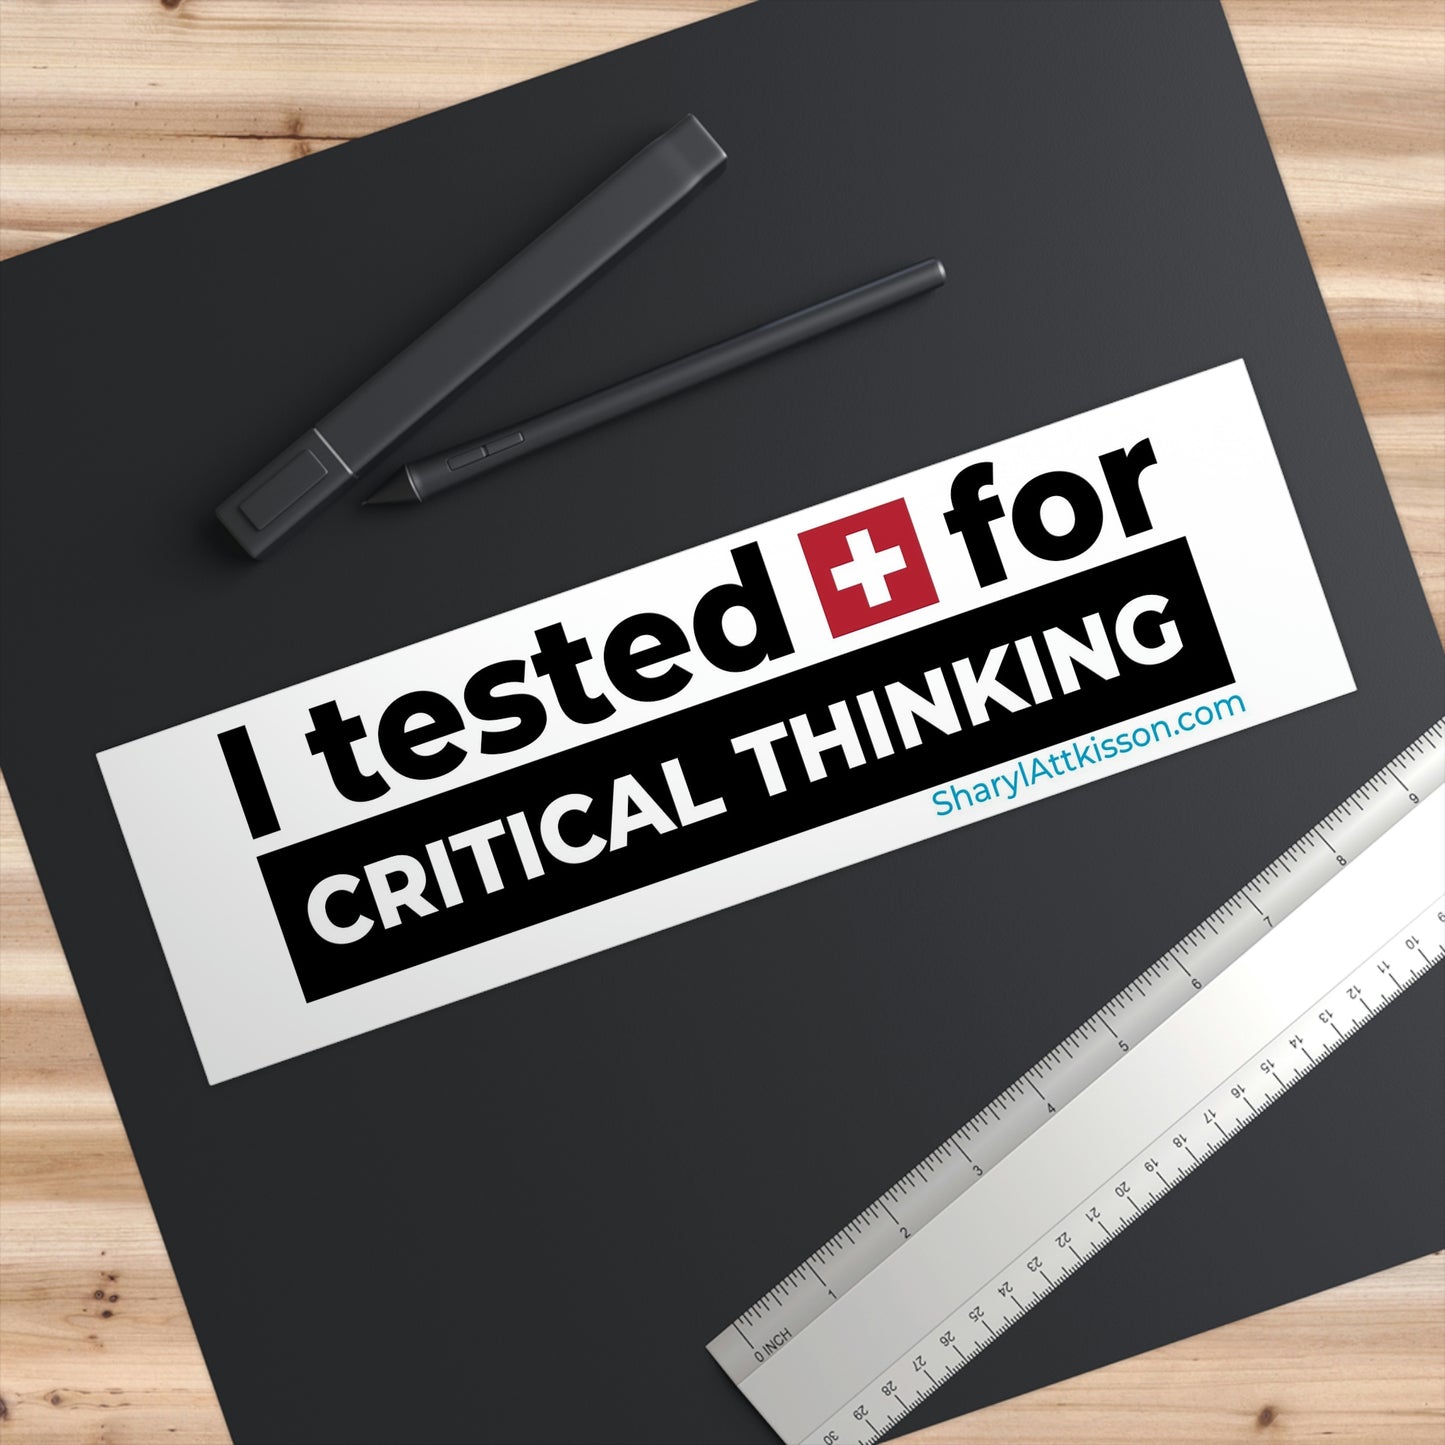 'I Tested Positive for Critical Thinking' Bumper Sticker